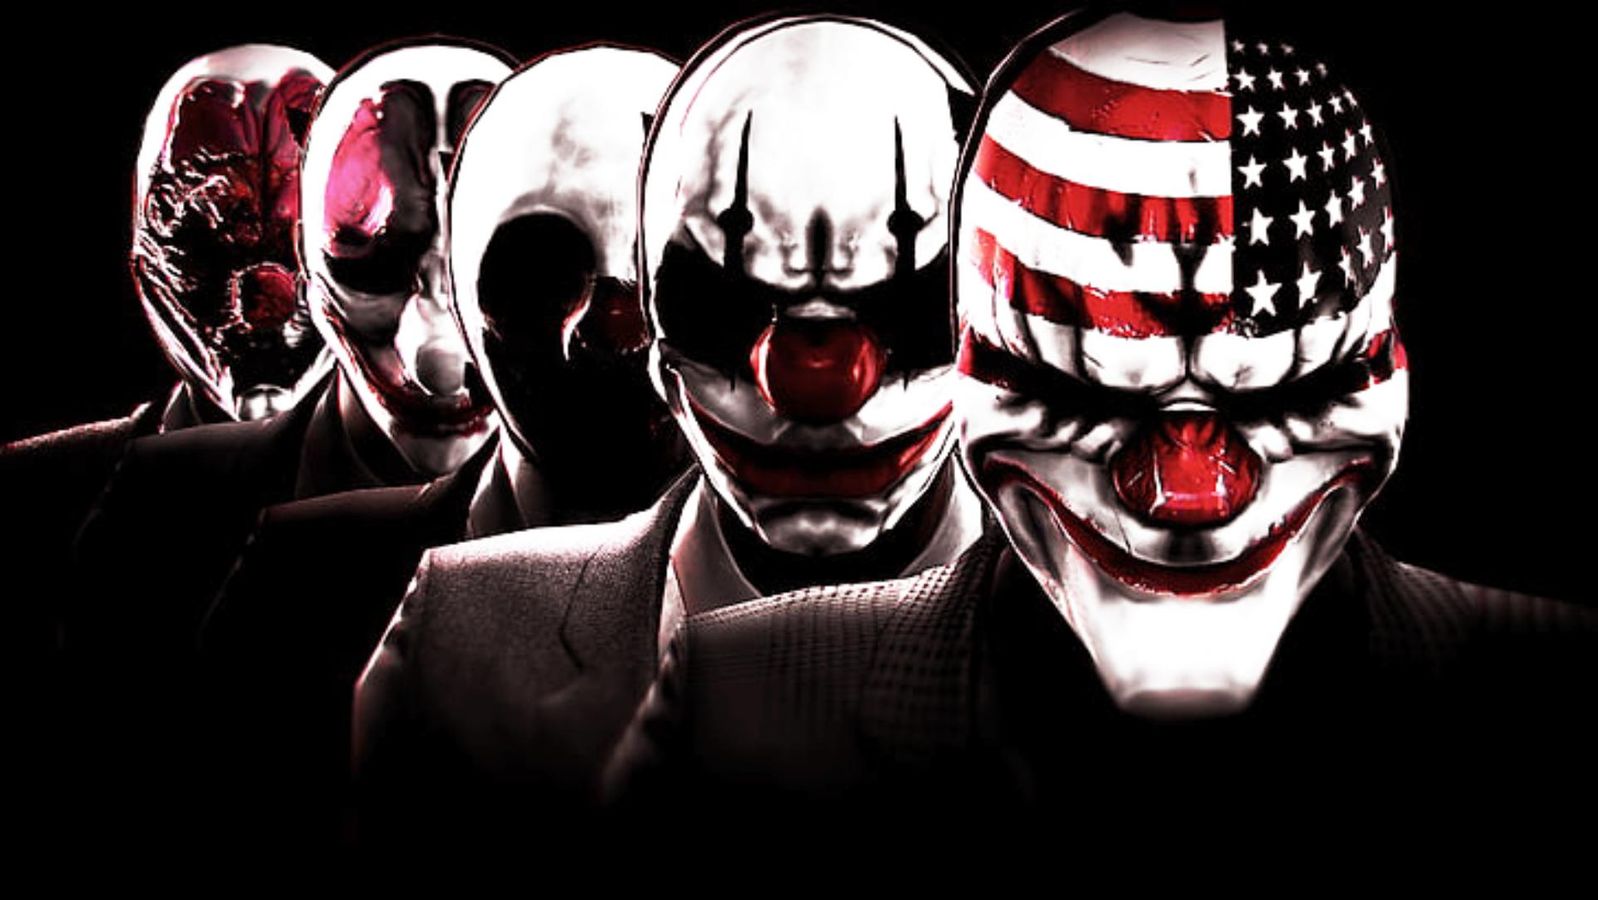 Can you take the mask off - picture of the Payday gang and their masks